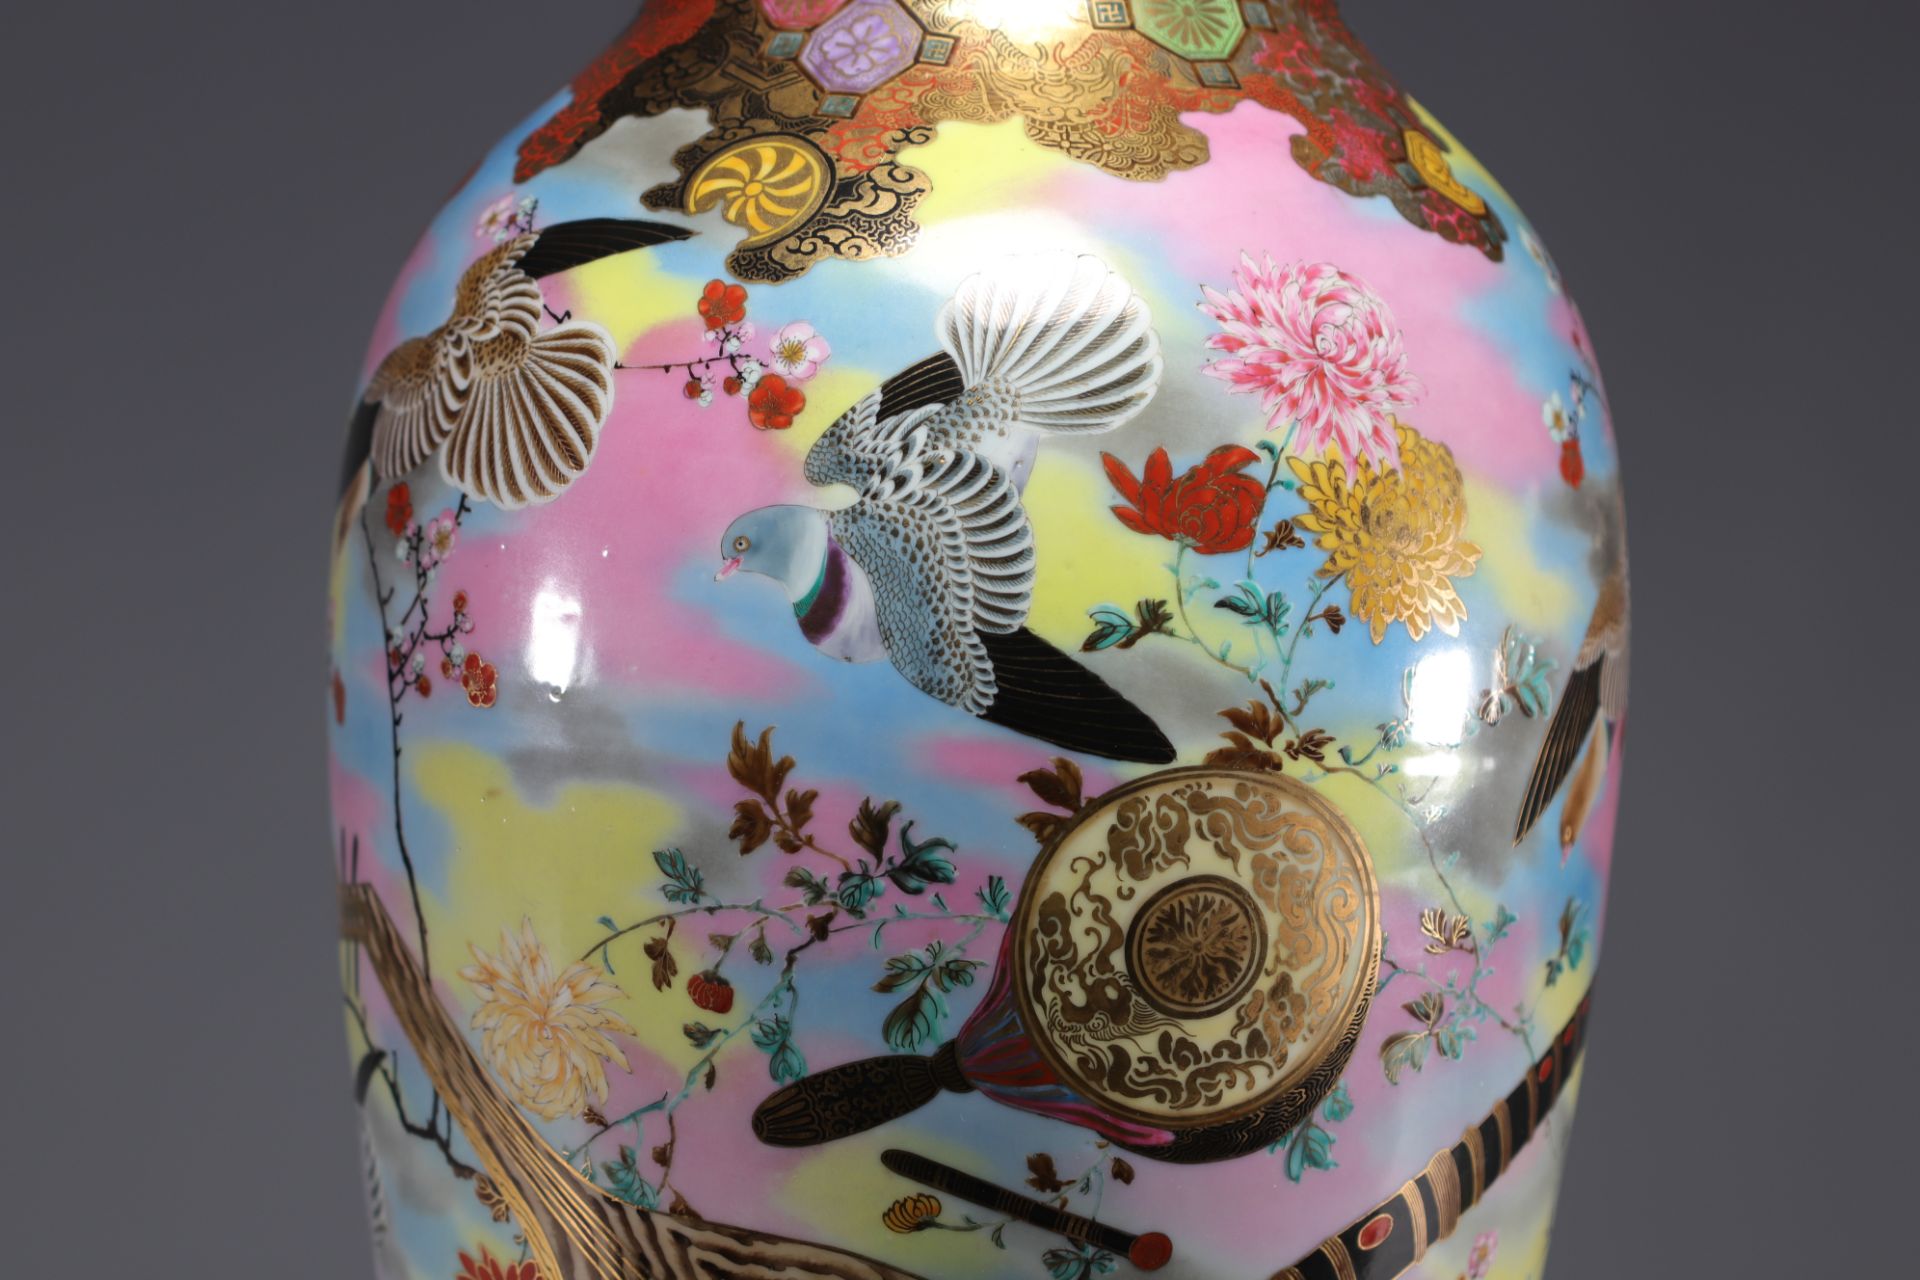 Japan - A pair of Satsuma vases with radiant doves, pigeons and flowers, Meiji period.Â - Image 8 of 8